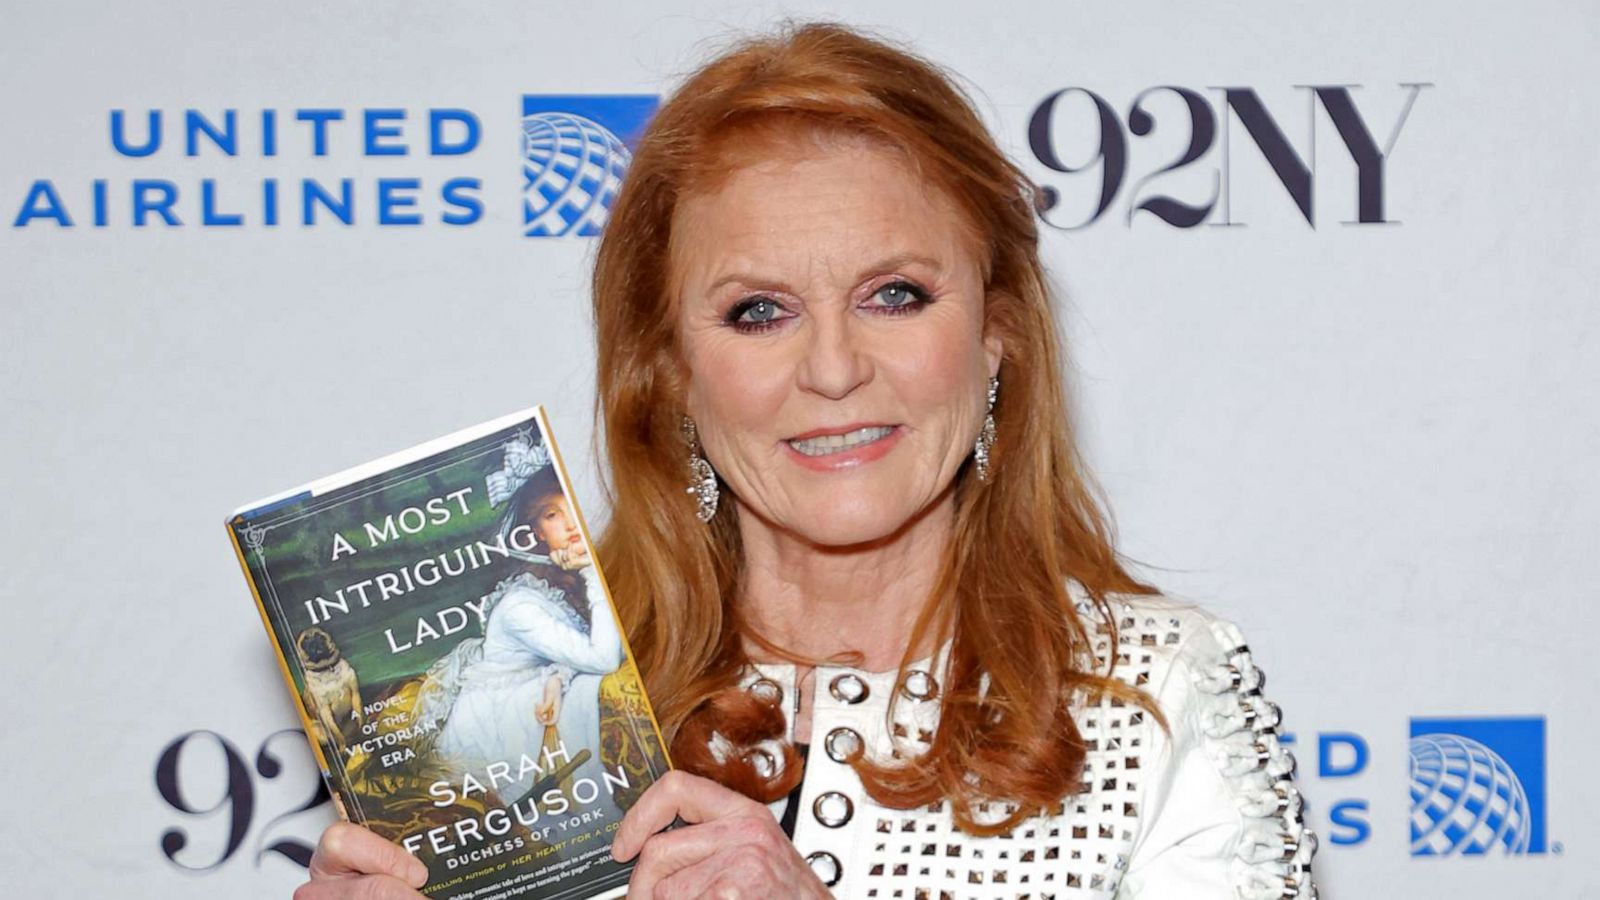 Sarah Ferguson says she feels liberated after death of Queen Elizabeth photo